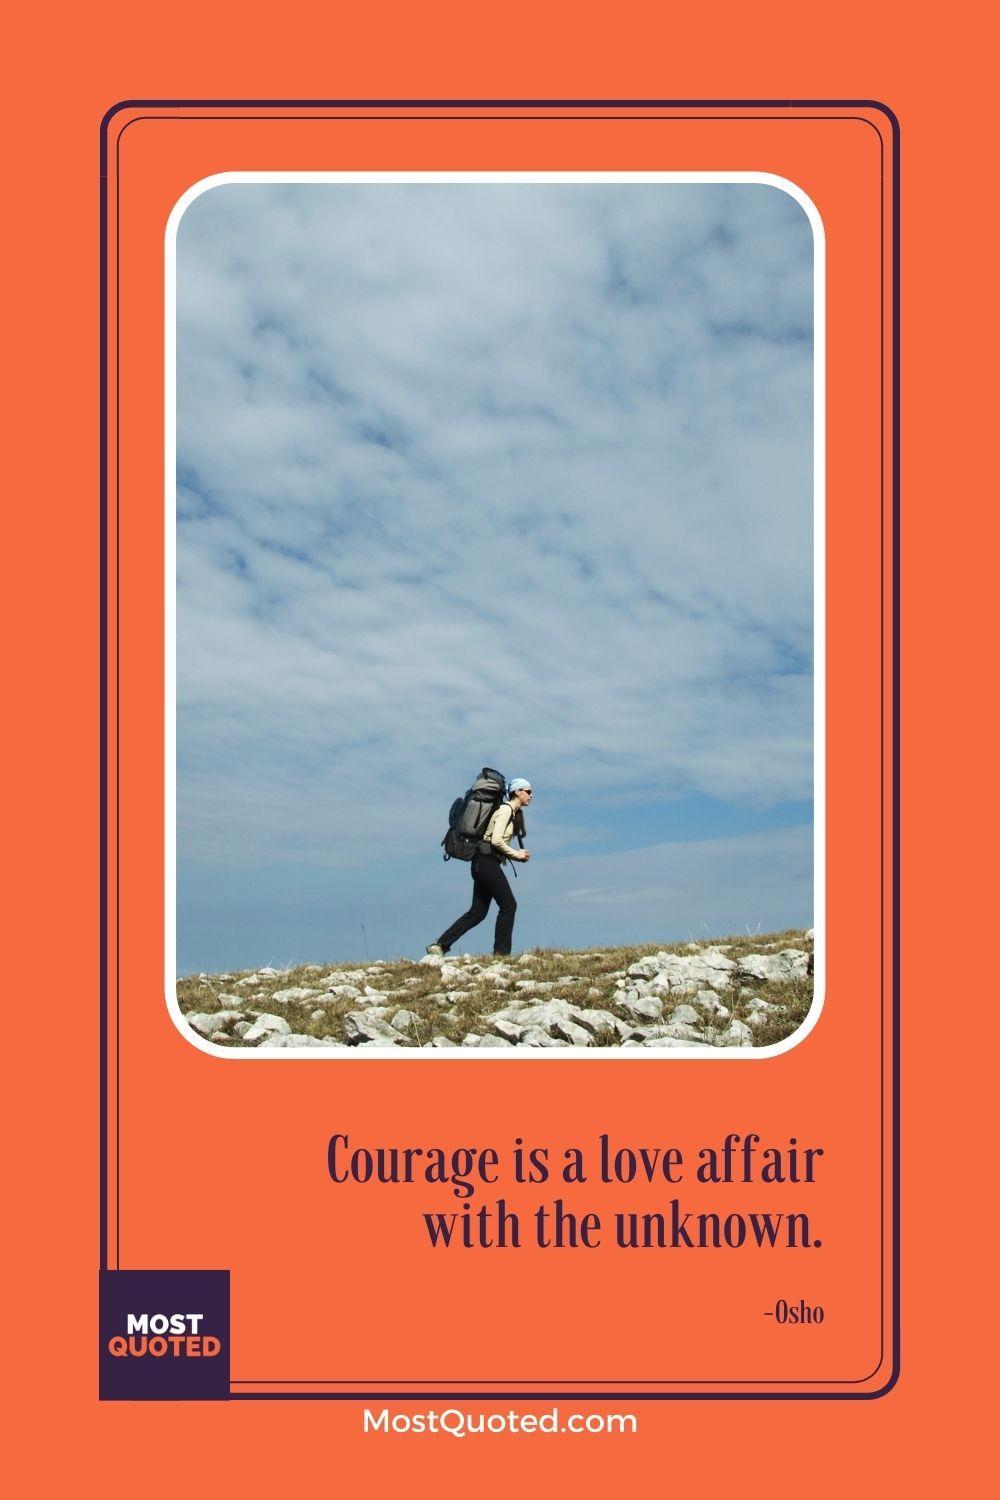 Courage is a love affair with the unknown. - Osho